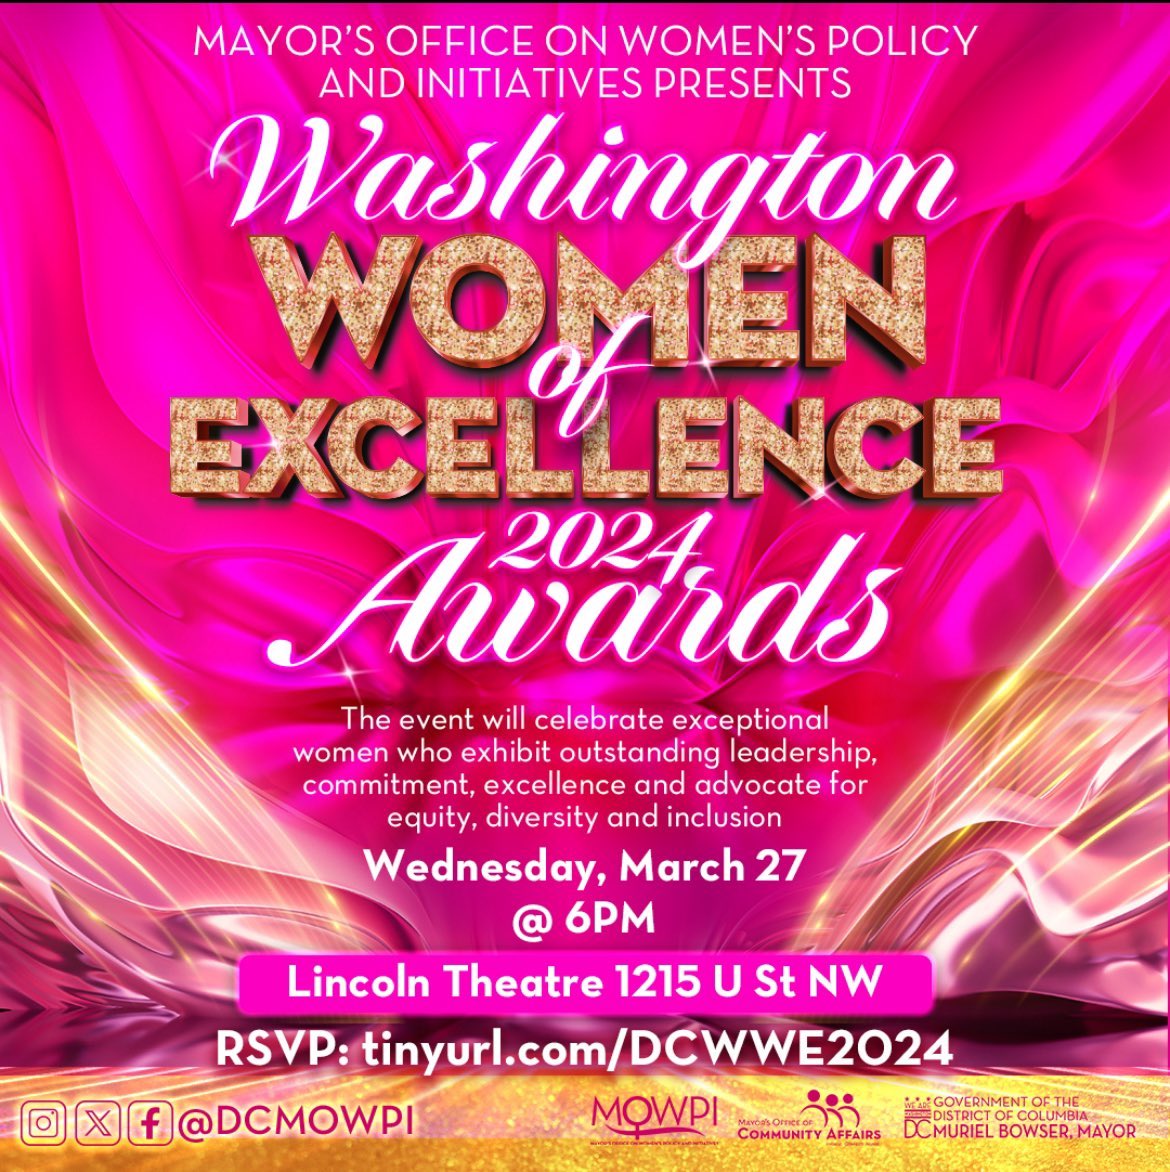 Celebrate Women's History Month by celebrating DC women. Join @DCMOWPI for the 2024 Washington Women of Excellence Awards, where we'll honor some of DC's outstanding leaders: 🗓️Wednesday, March 27 ⏰6PM 📍1215 U St NW ➡️tinyurl.com/DCWWE2024